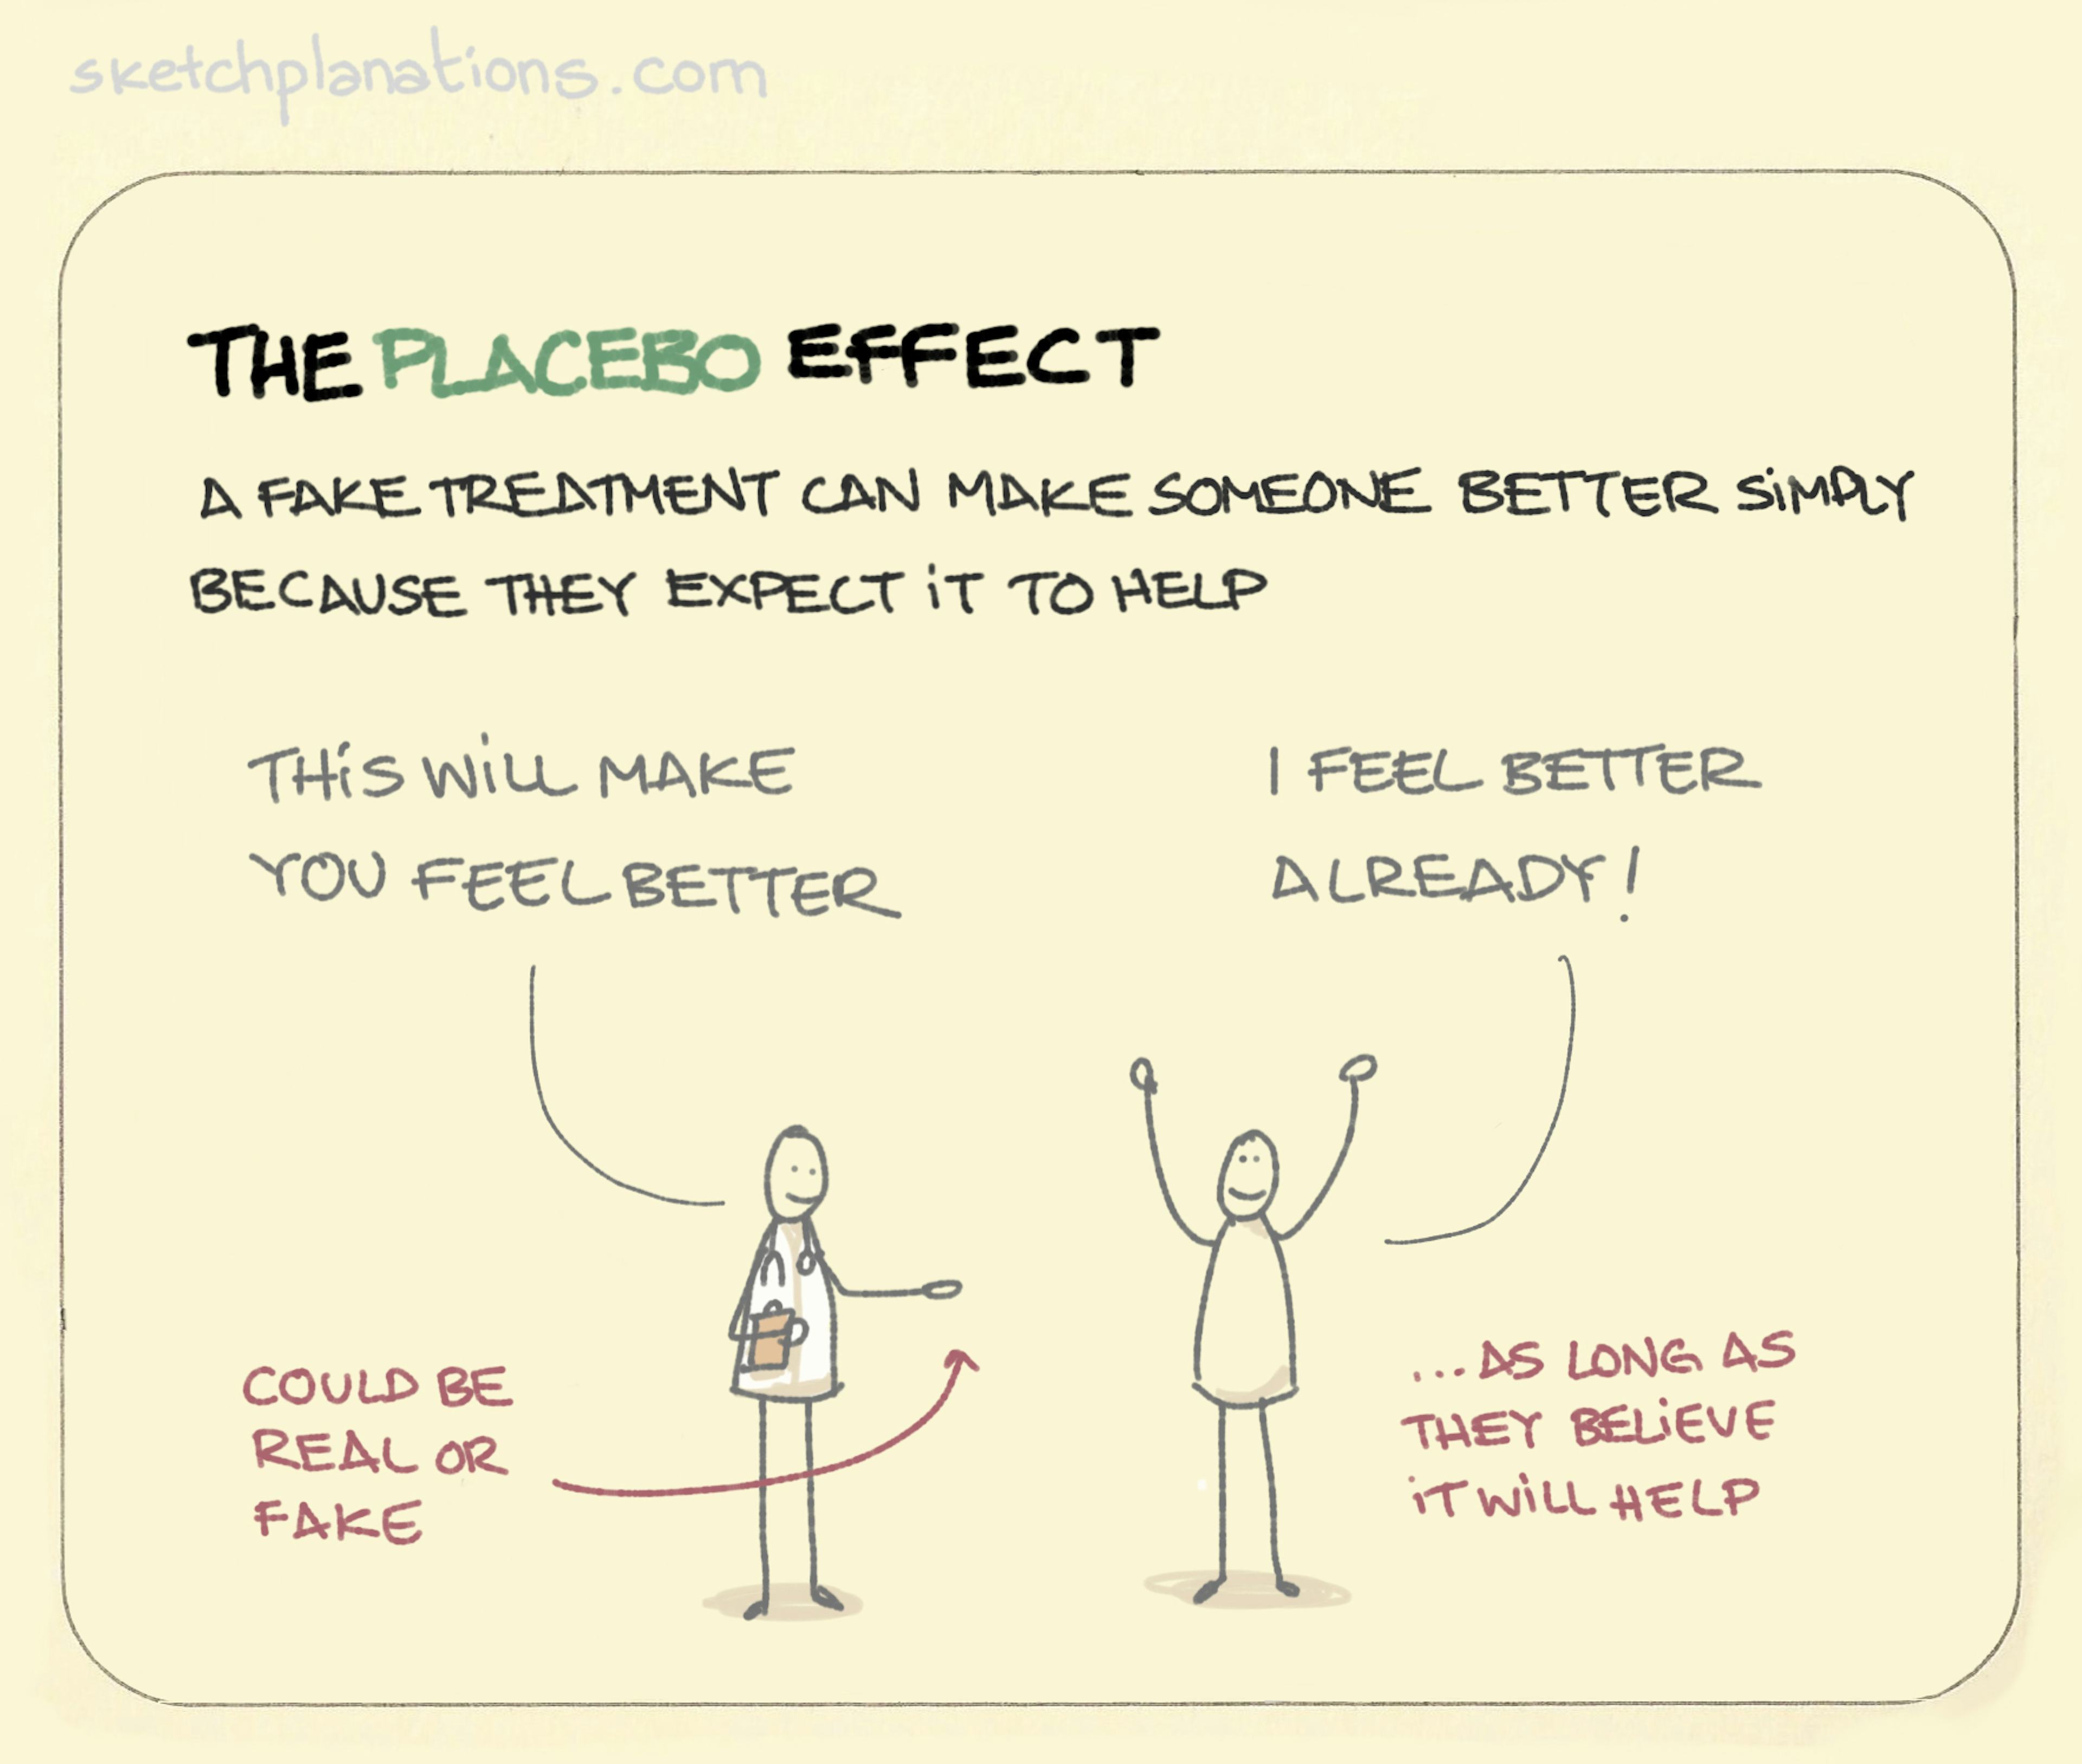 The placebo effect - Sketchplanations